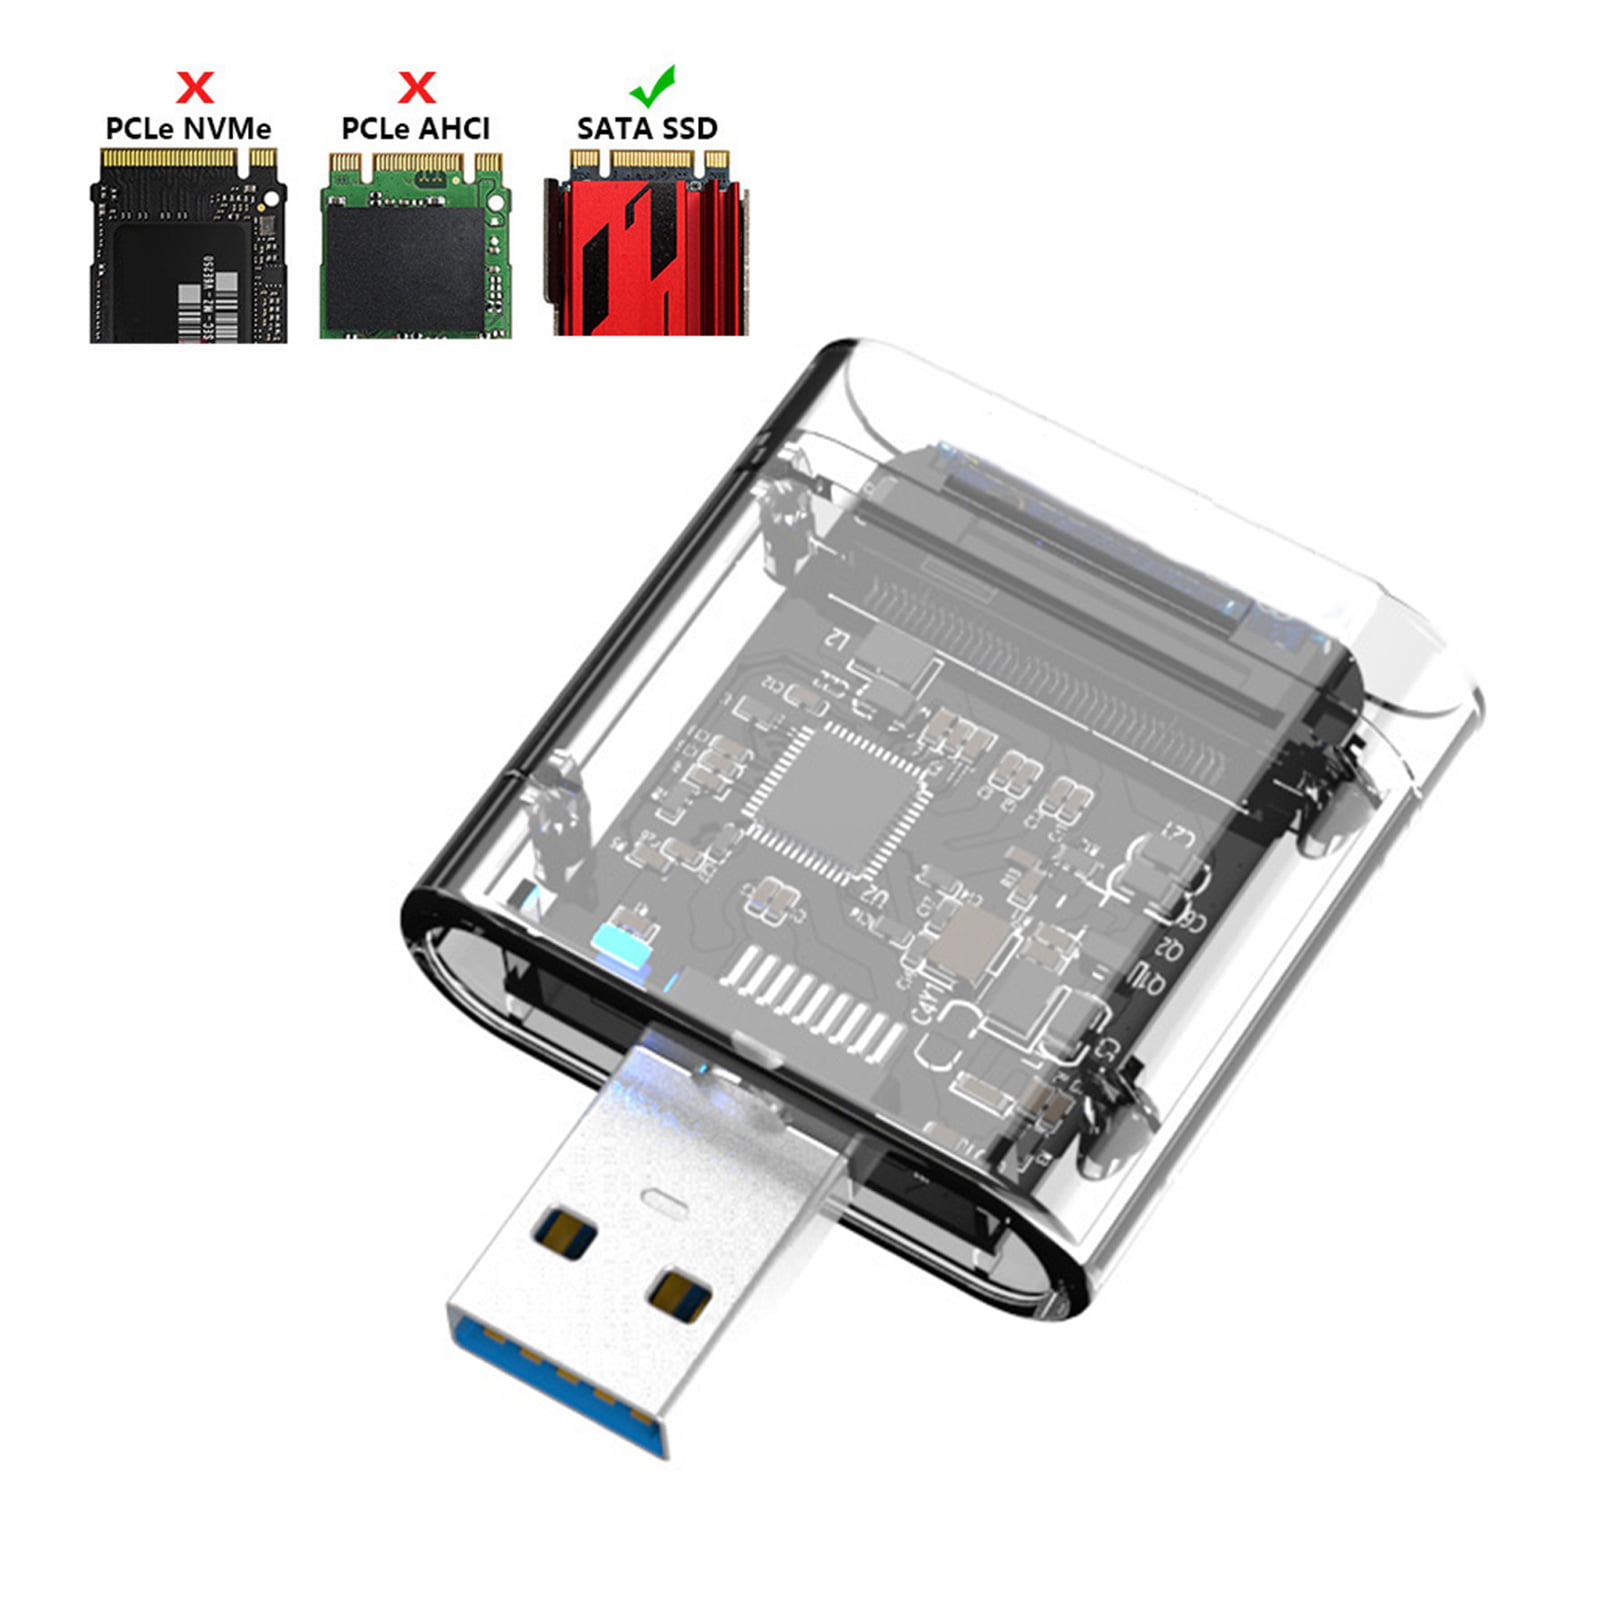 AOOOWER M2 SSD for Case SATA Chassis for M.2 To USB 3.0 5G SSD Adapter For PCIE SATA M / B for Key SSD Disk Box For 2230/224 - Walmart.com